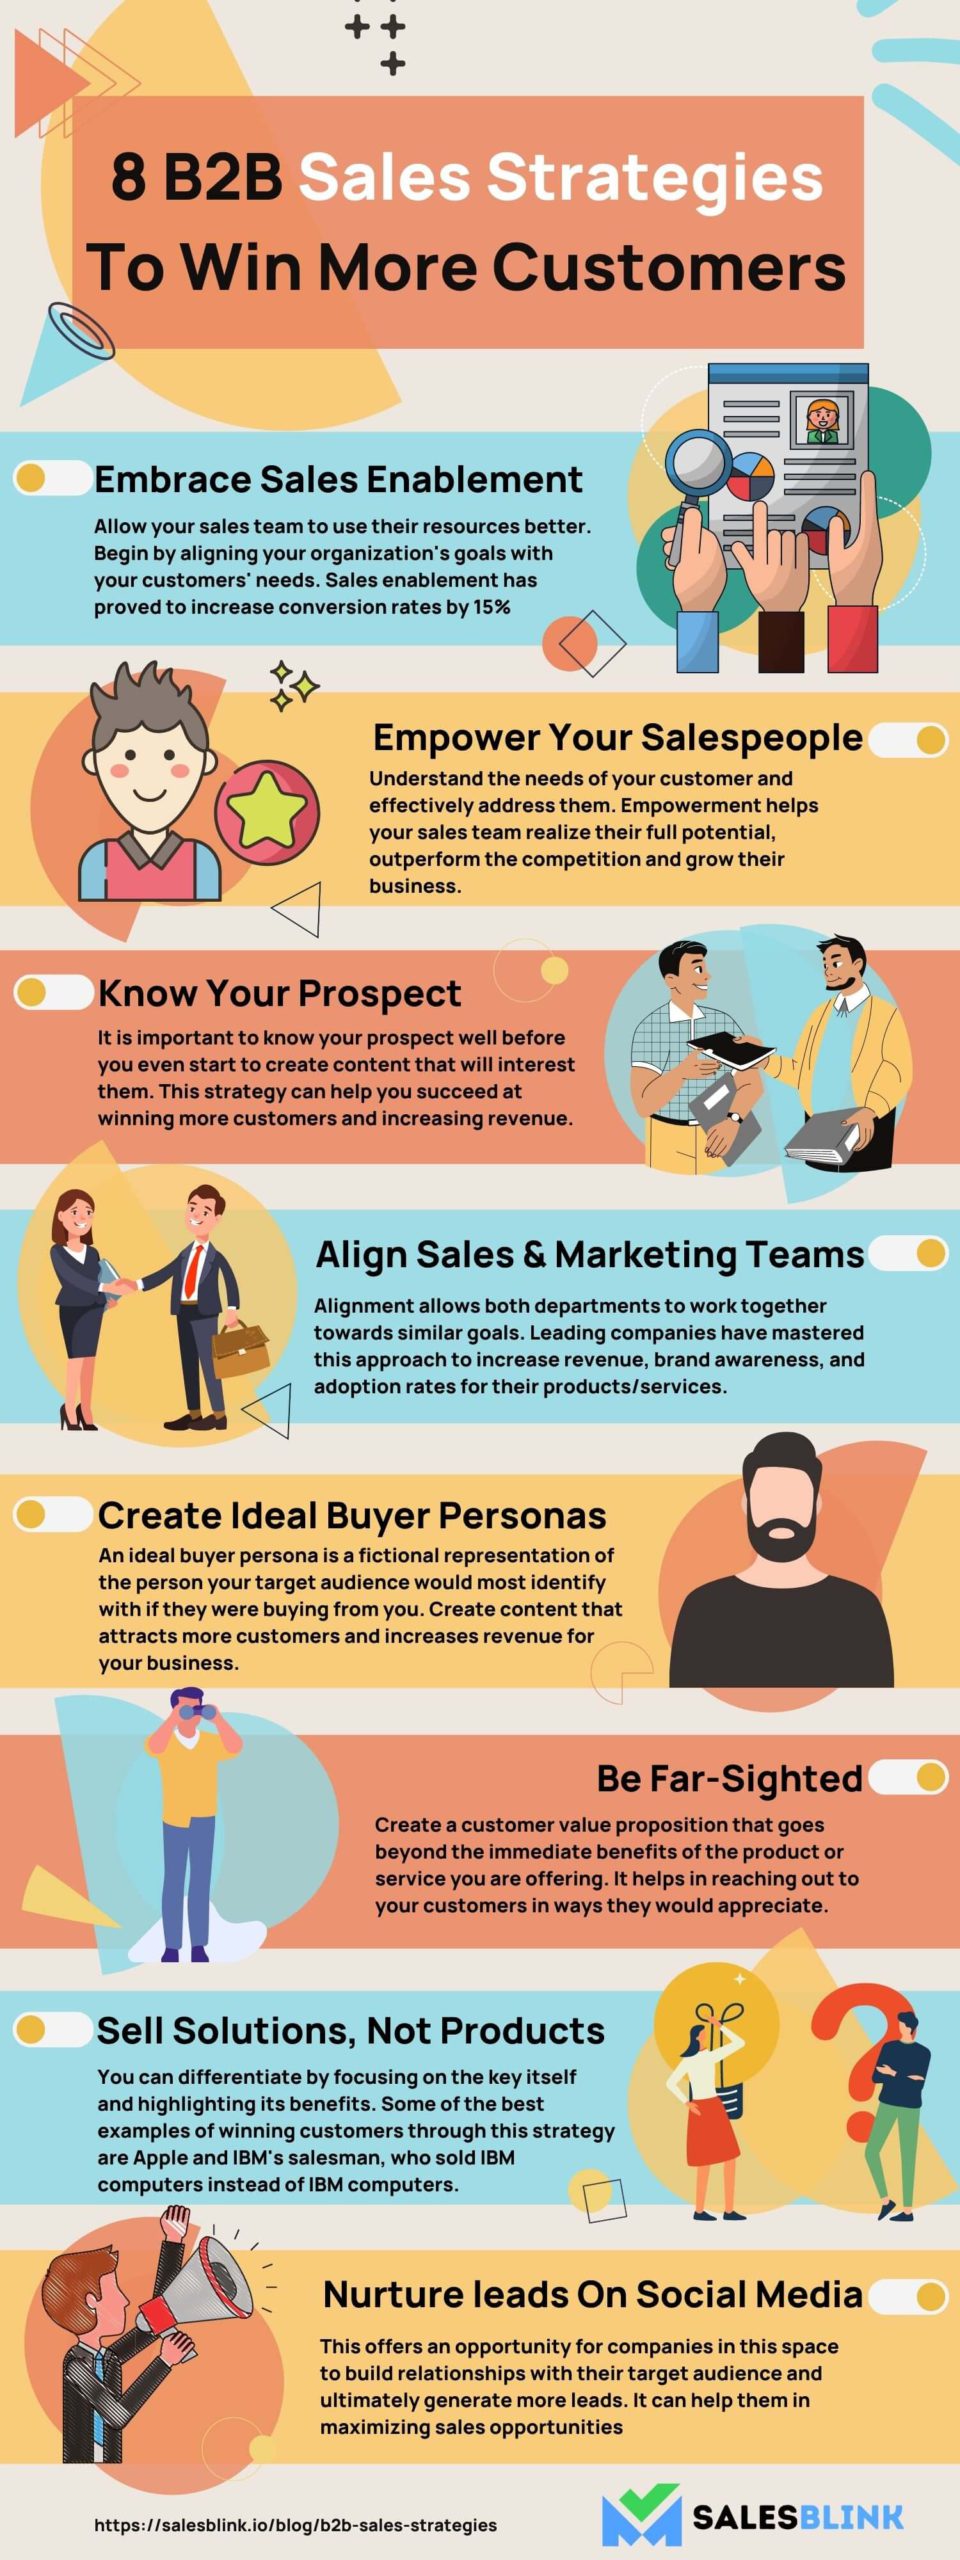 8 B2B Sales Strategies To Win More Customers - Infographic